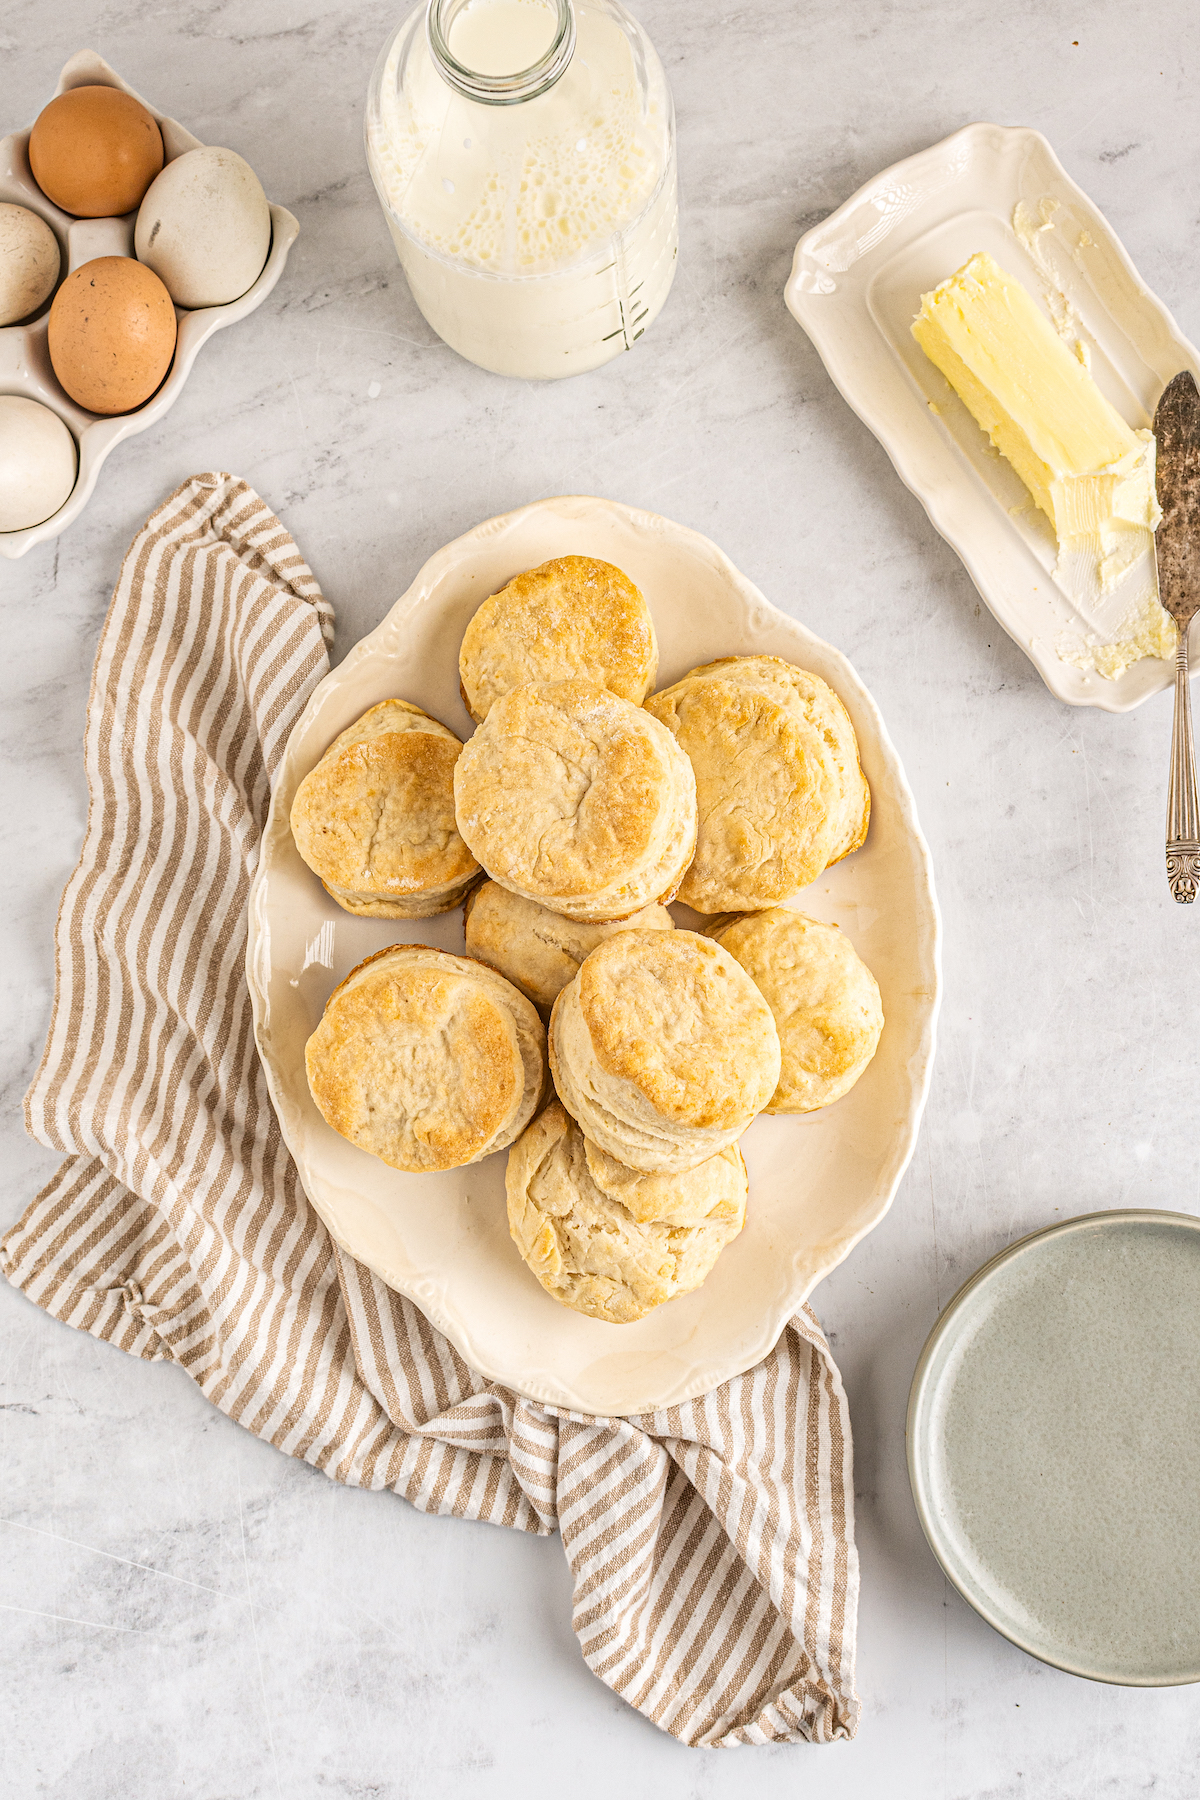 An oval platter of homemade biscuits next to a plate of butter, a carton of eggs, and a glass bottle of milk.